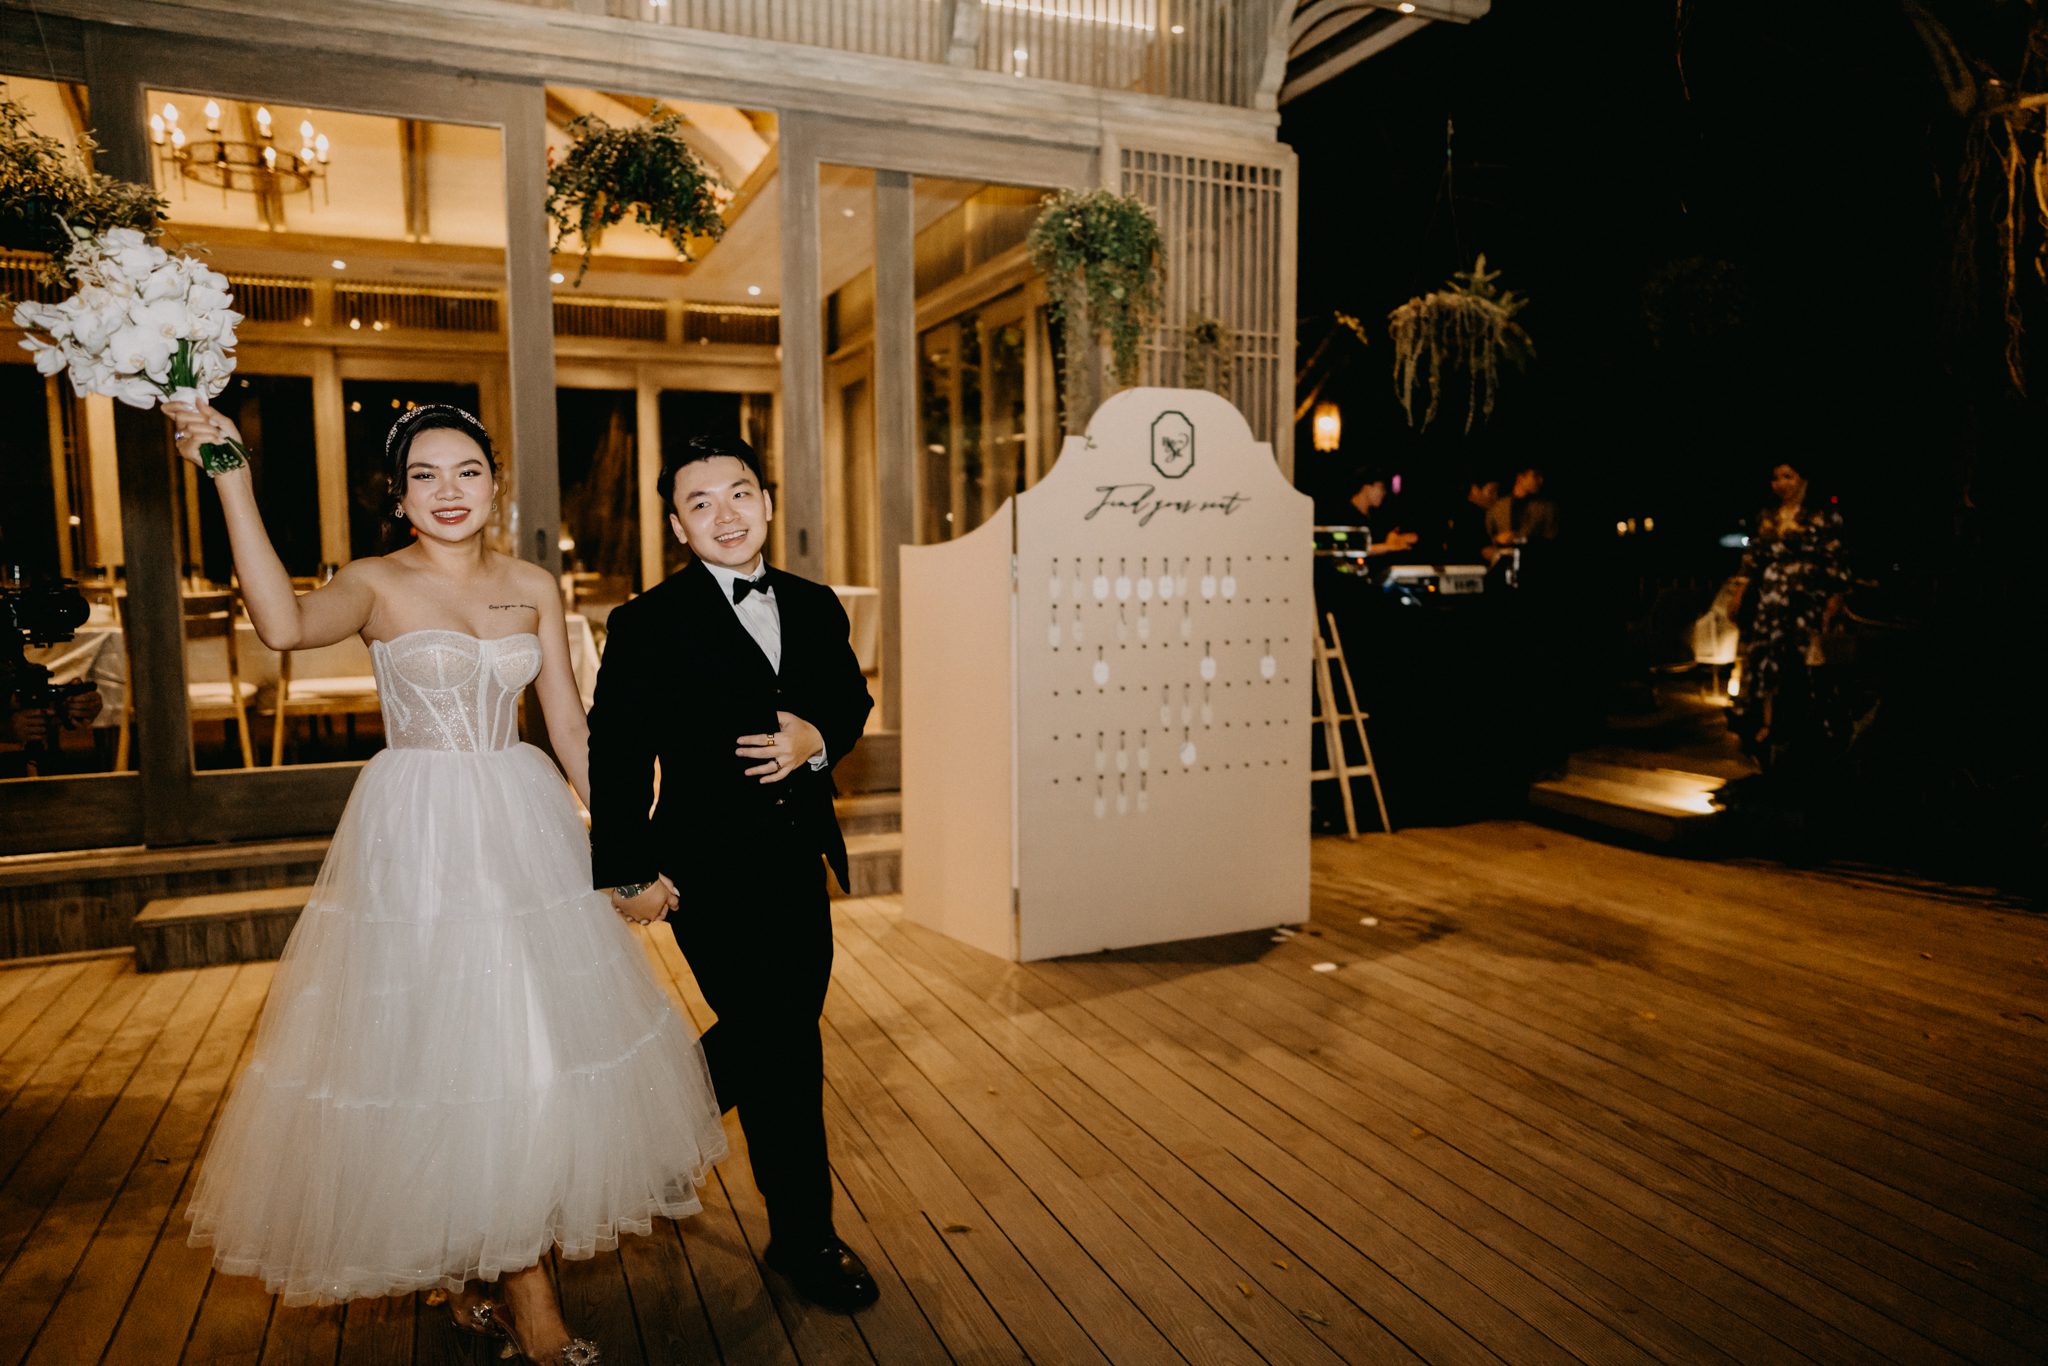 Saigon intimate wedding at An Lam Retreat 5379 - The Planners